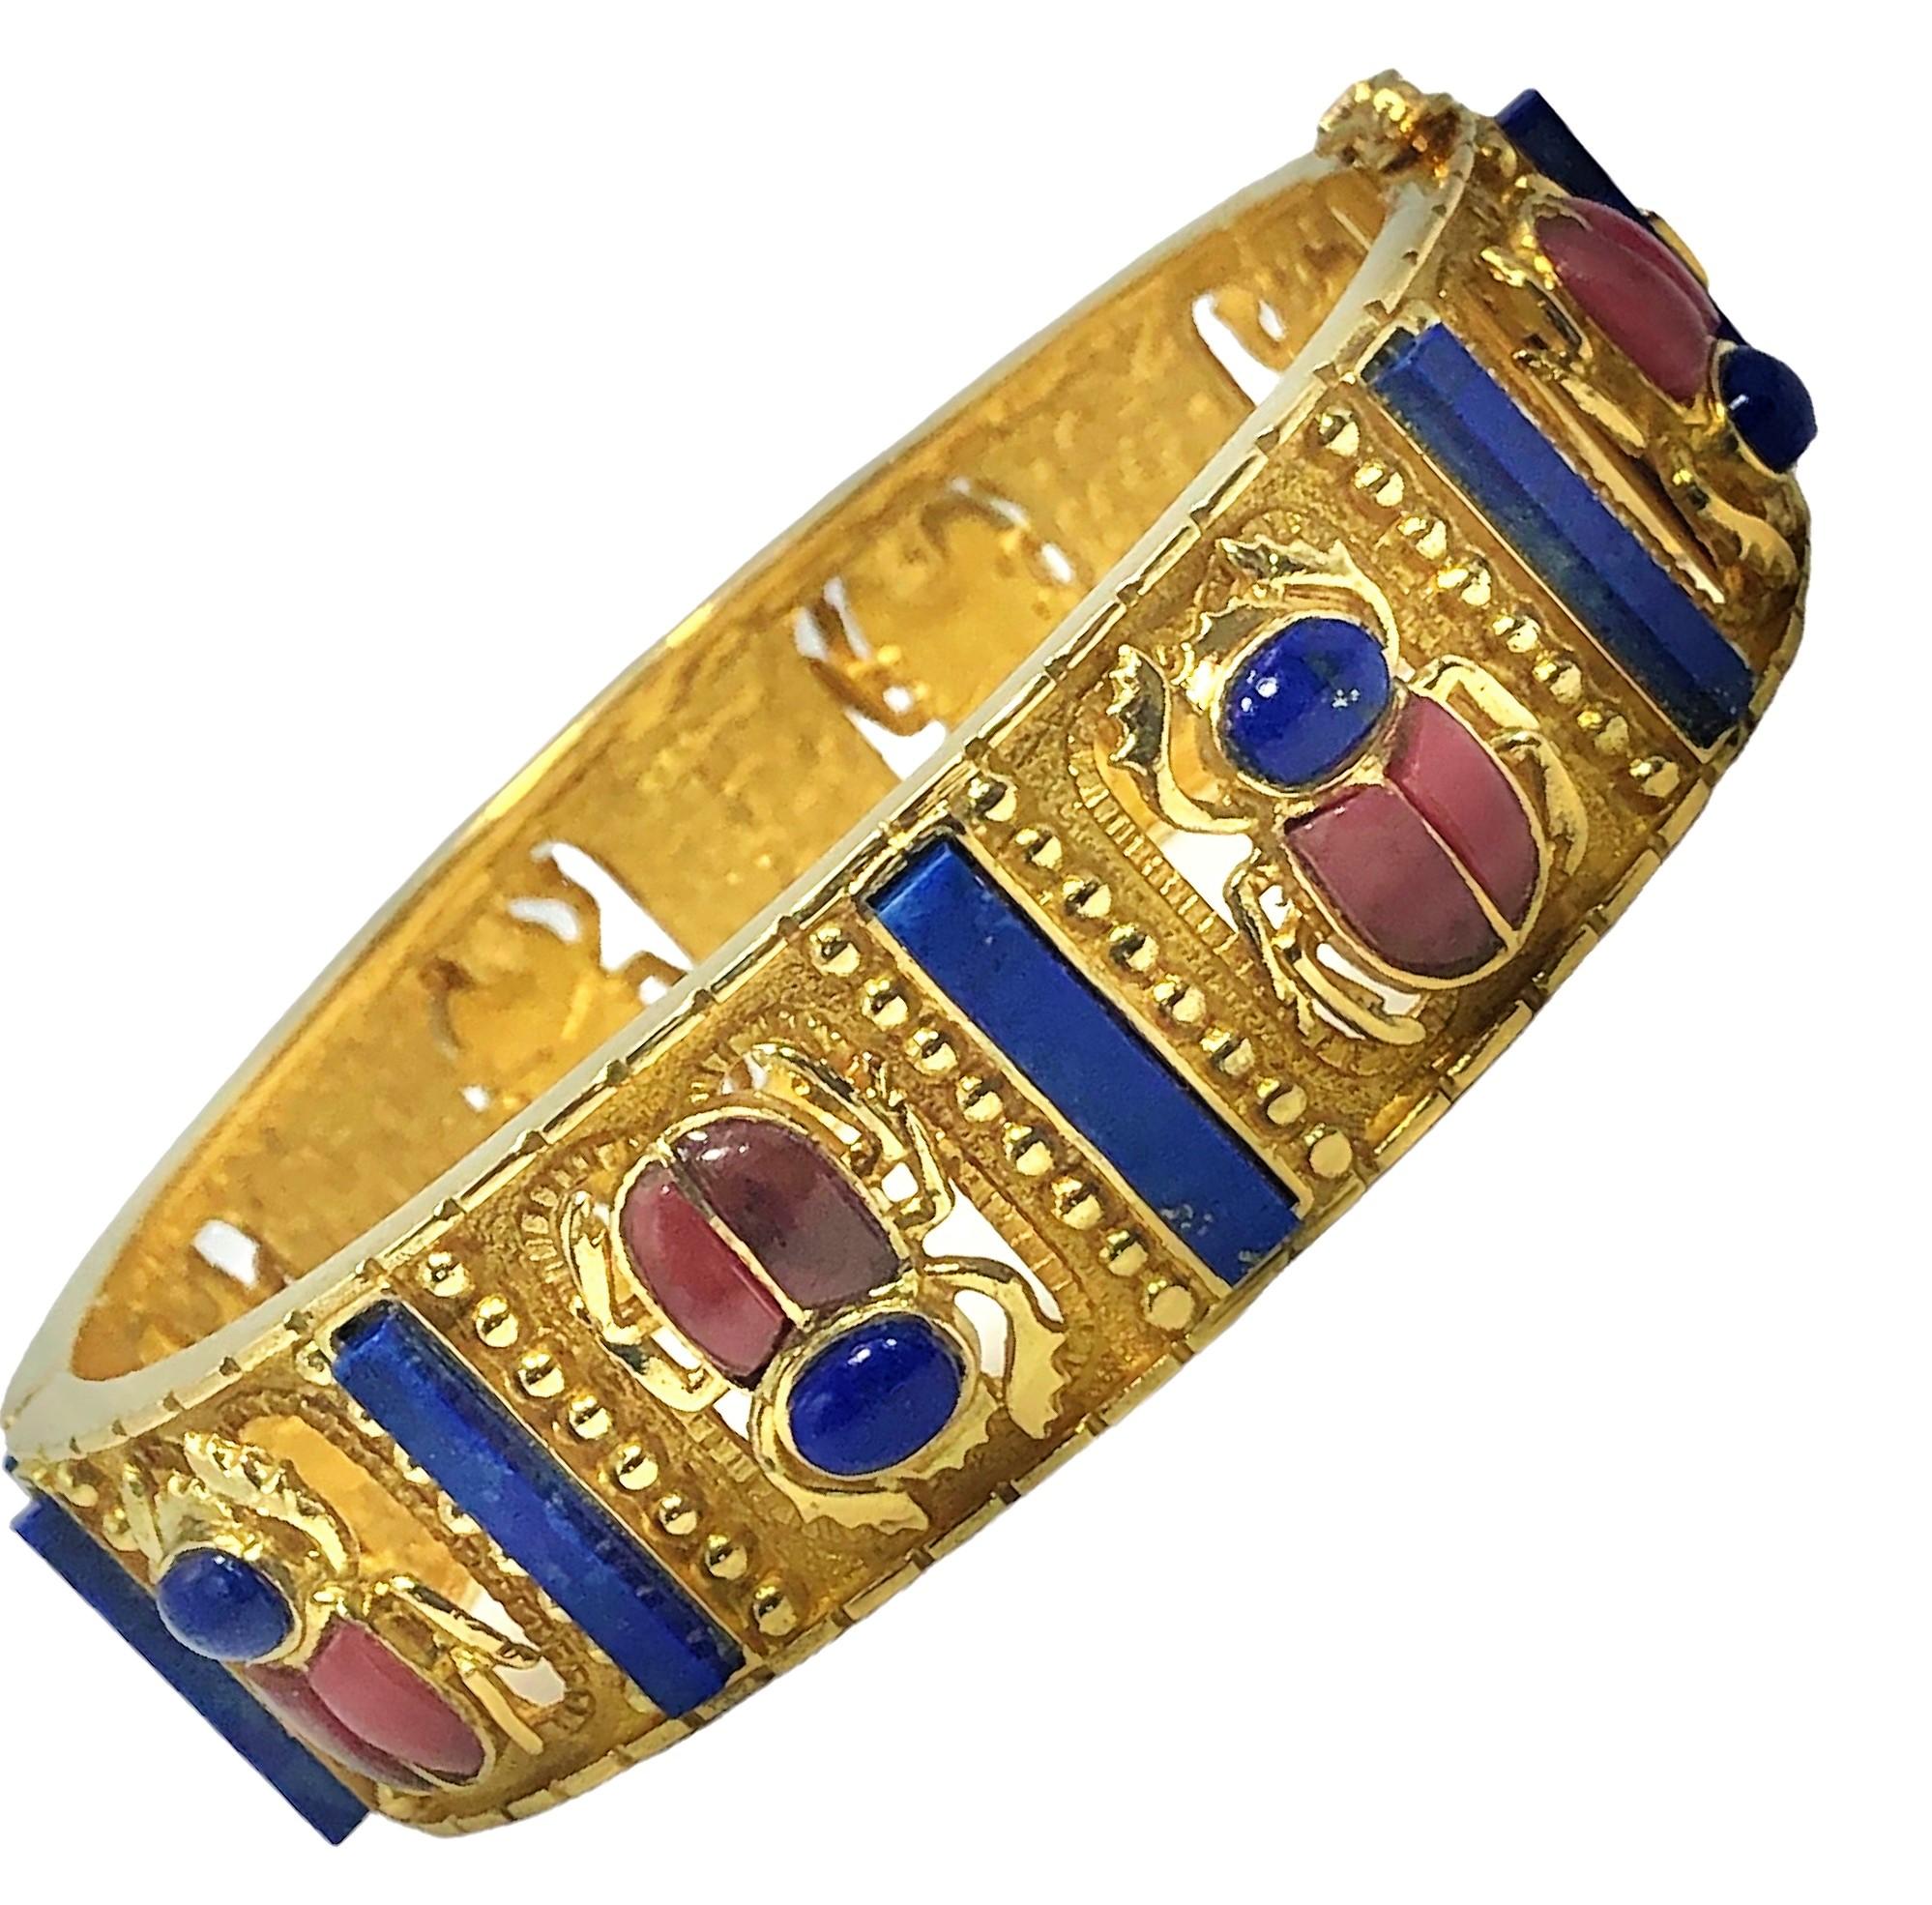 This very well crafted Egyptian style bangle bracelet exhibits many different gold textures that are inlaid with vivid blue Lapis Lazuli columns and with eight Lapis and Rhodonite Scarab Beetle motifs. Hinged on one side to facilitate ease of use.